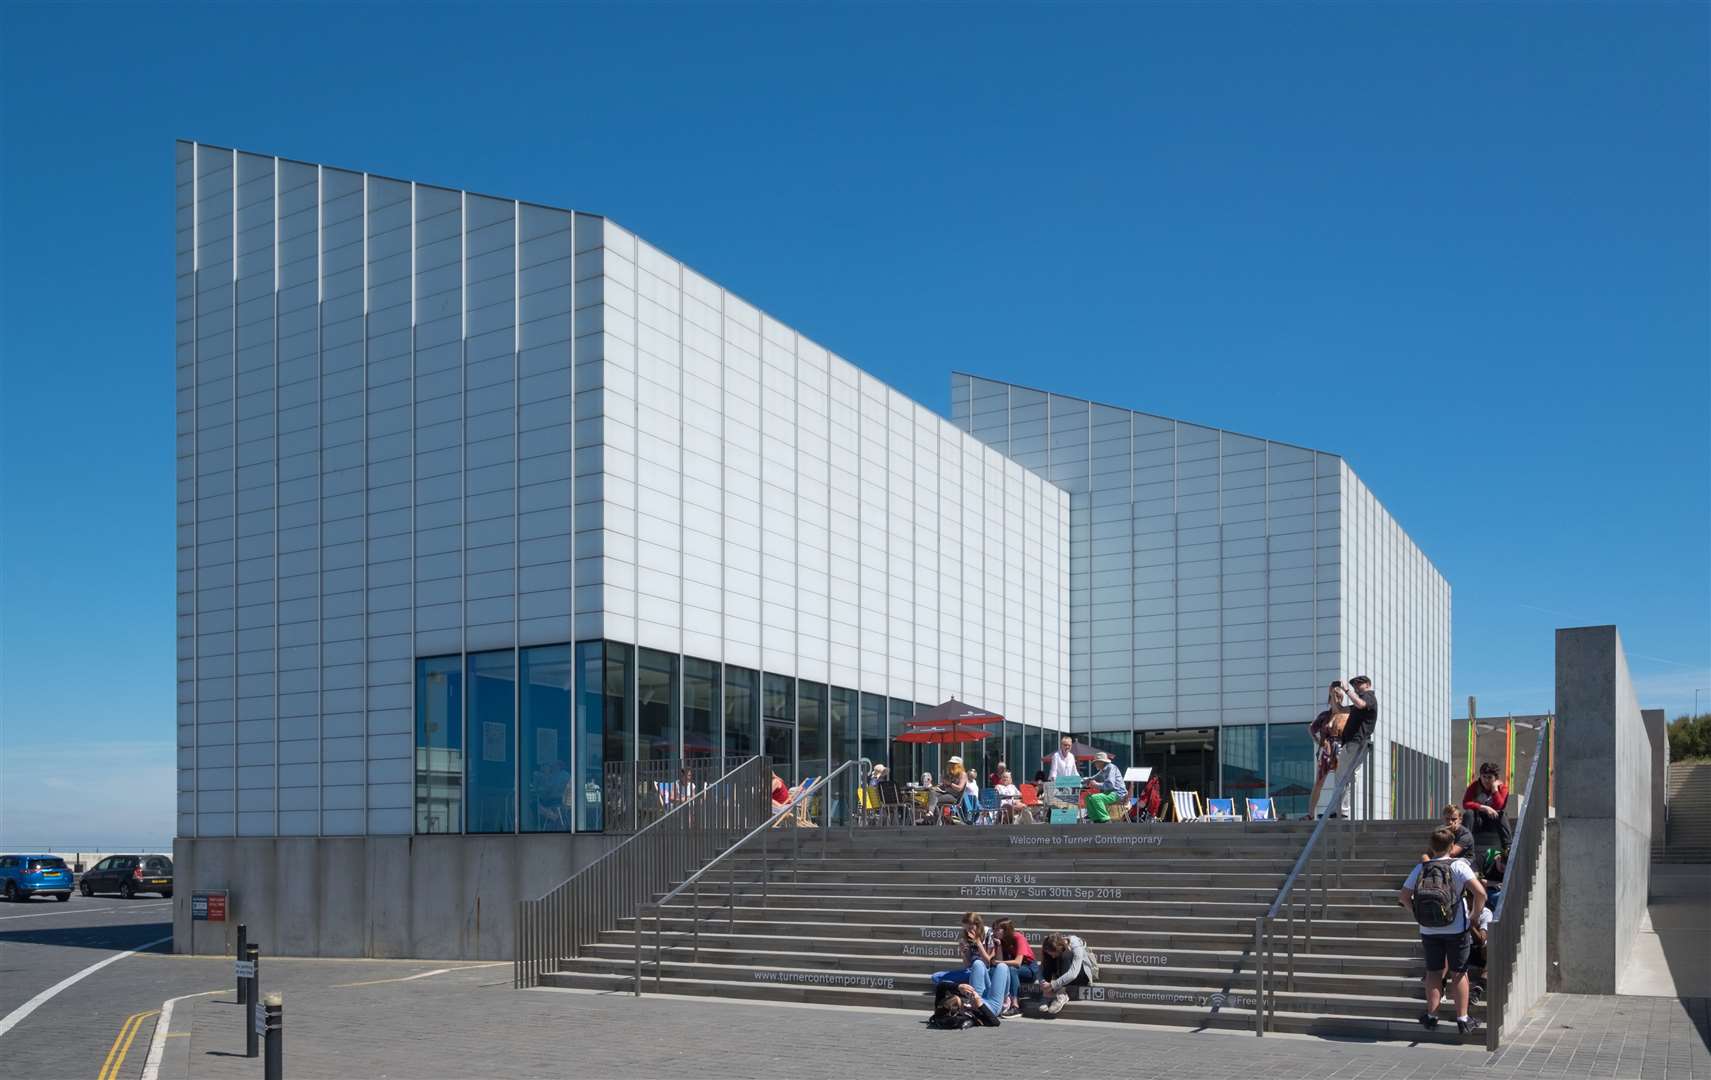 The Turner Contemporary has had more than four million visitors since it opened in 2011